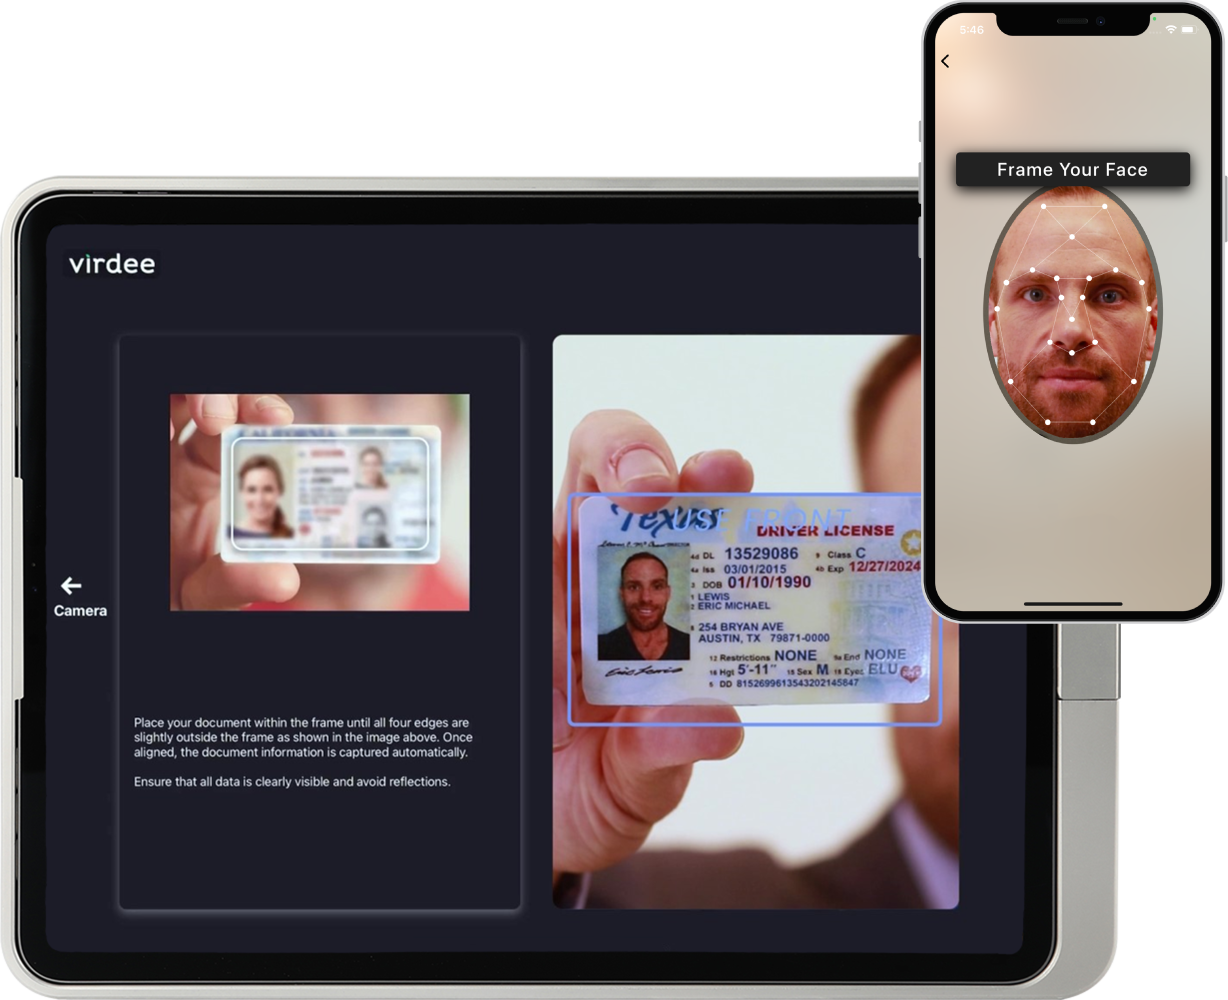 ID verification on both Kiosk and Mobile with ID and facial scanning